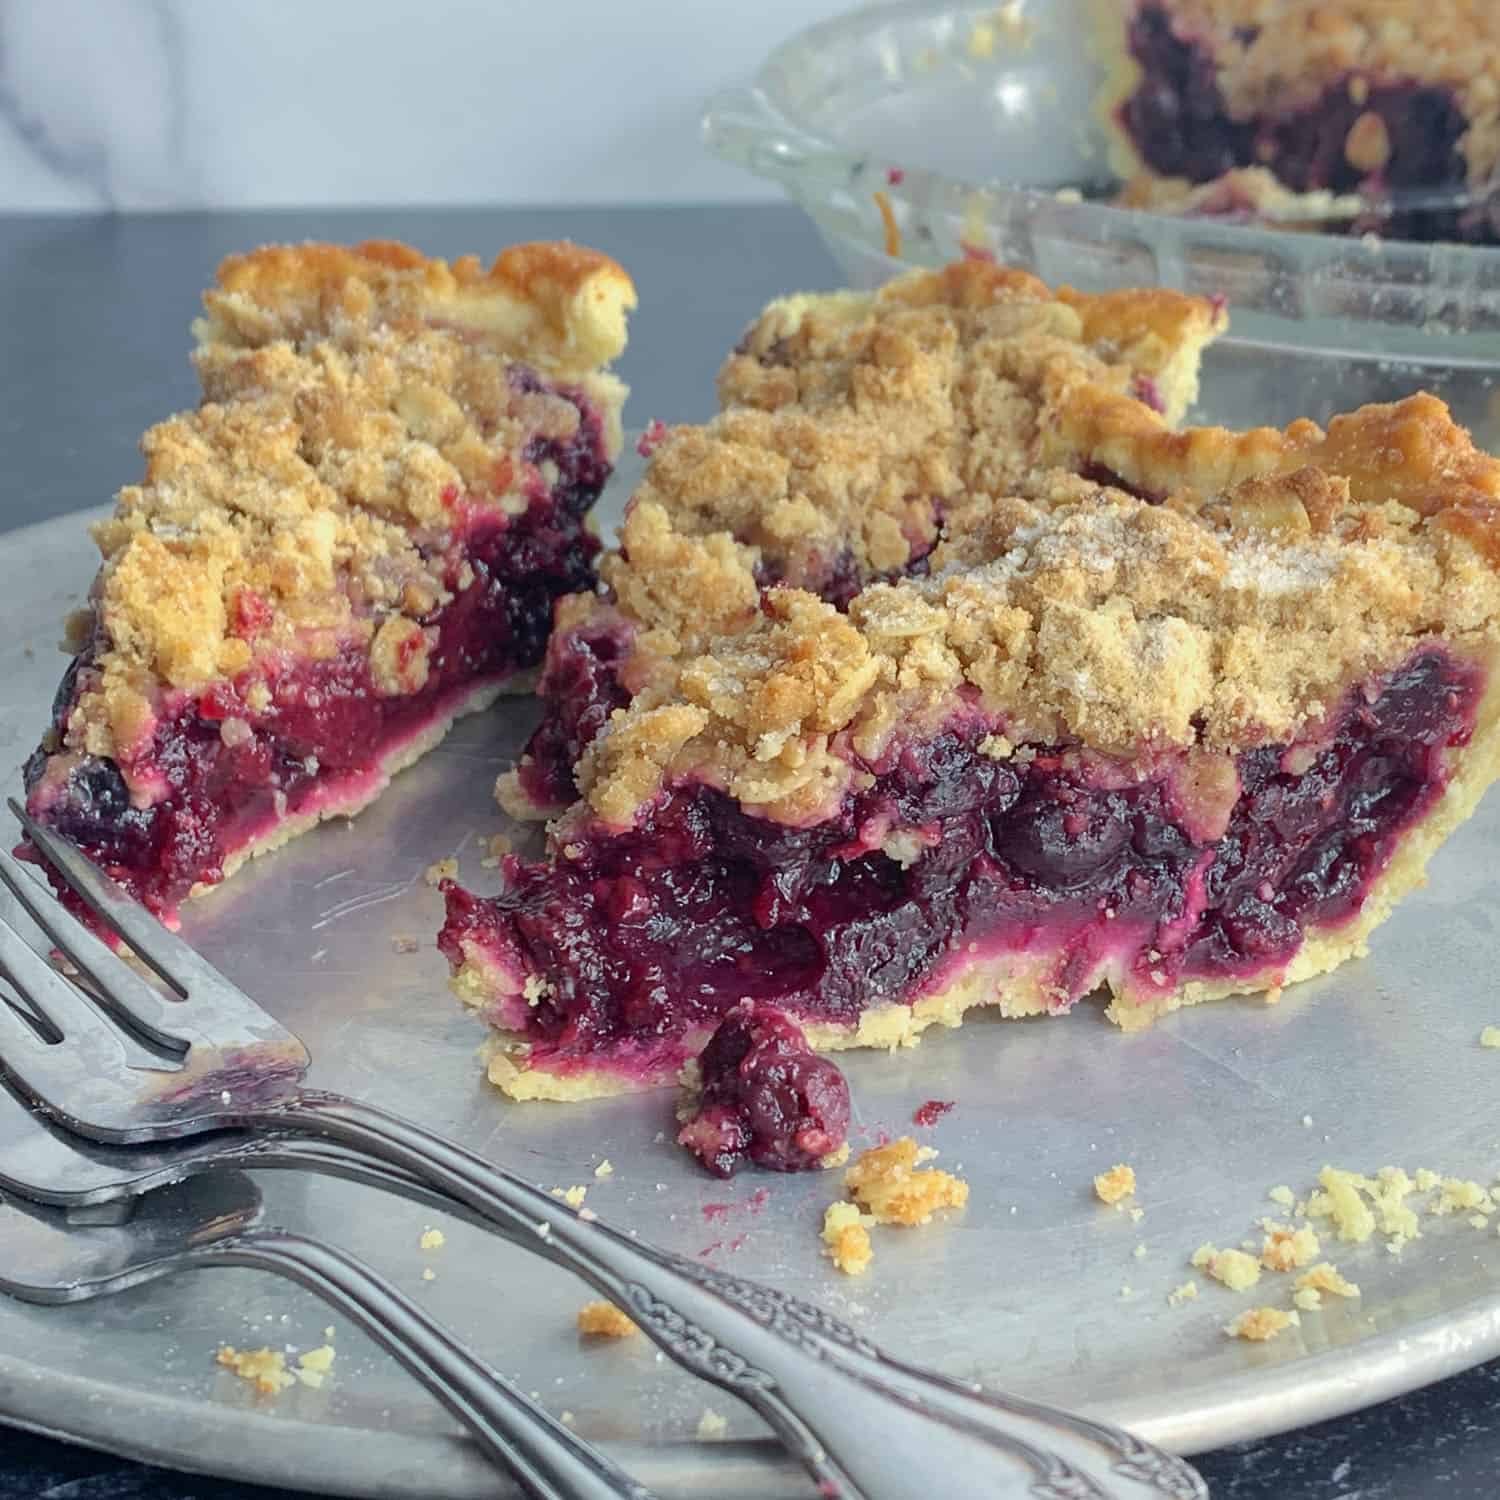 Amazing Mixed Berry Pie with Crumb Topping